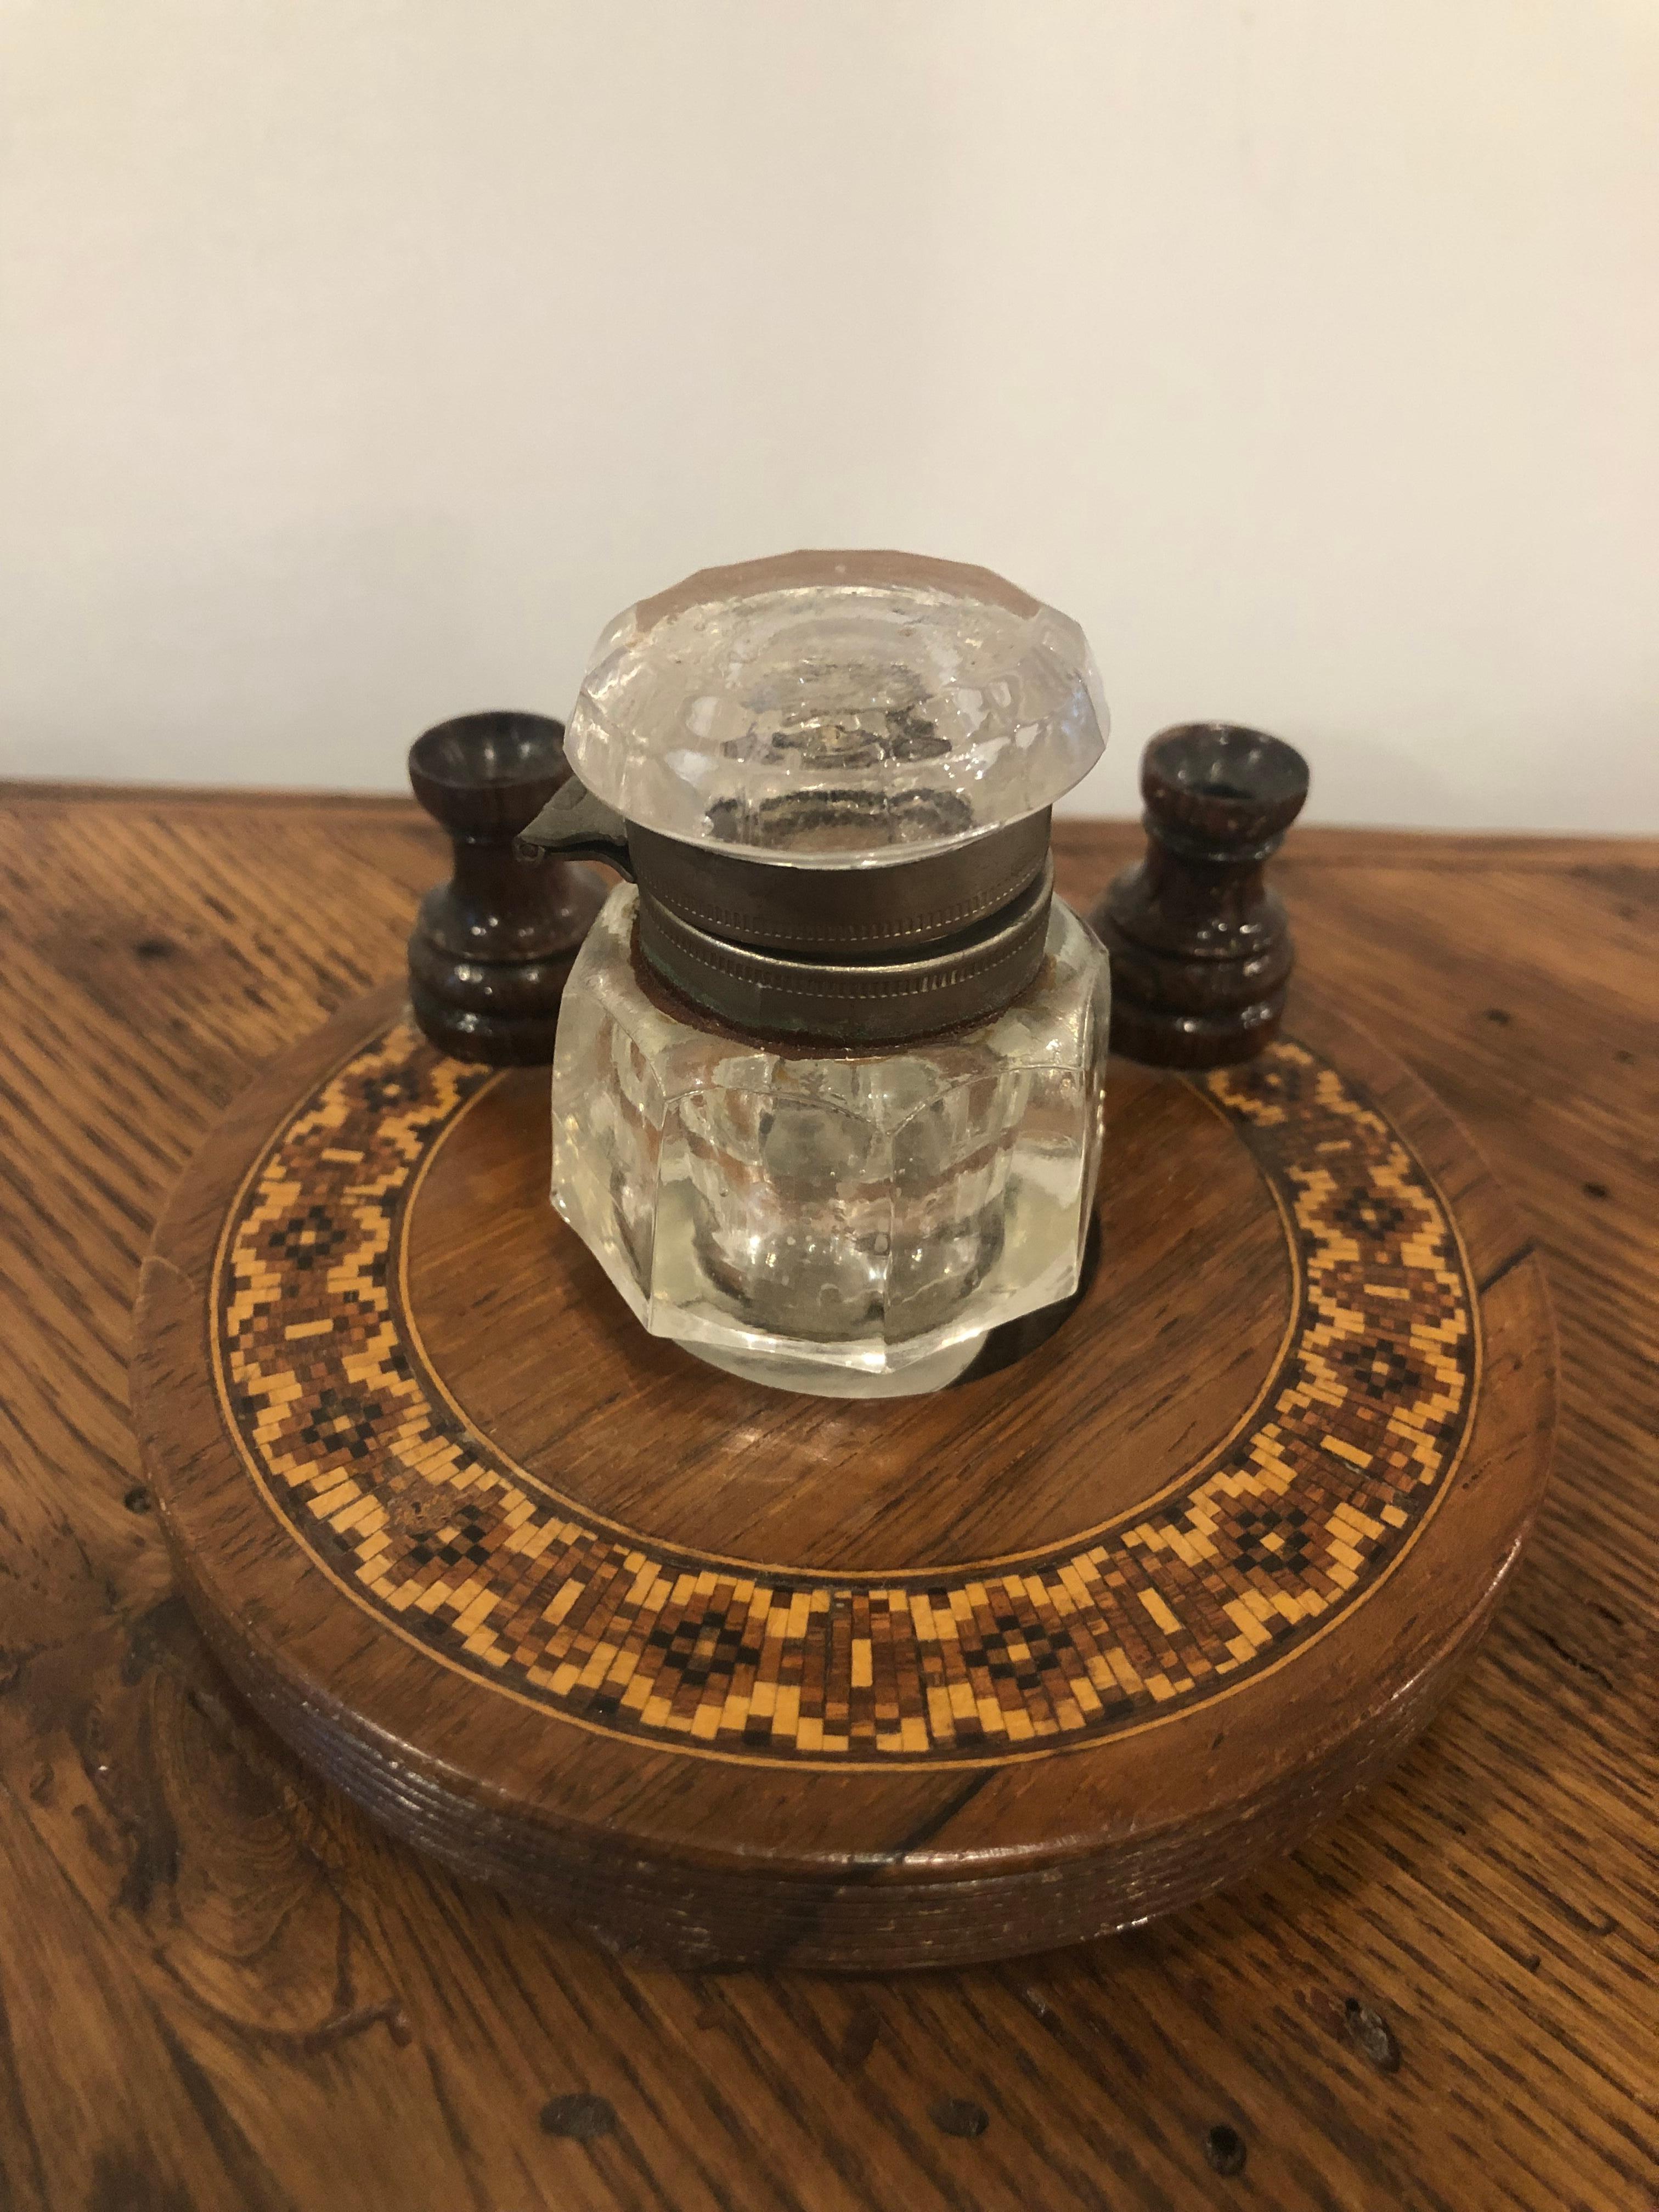 Late 19th century Tunbridge ware rosewood ink stand with bun feet and a crystal ink well. A nice combination of wood inlay and crystal. This is from a private collector who traveled the world buying beautiful pieces.